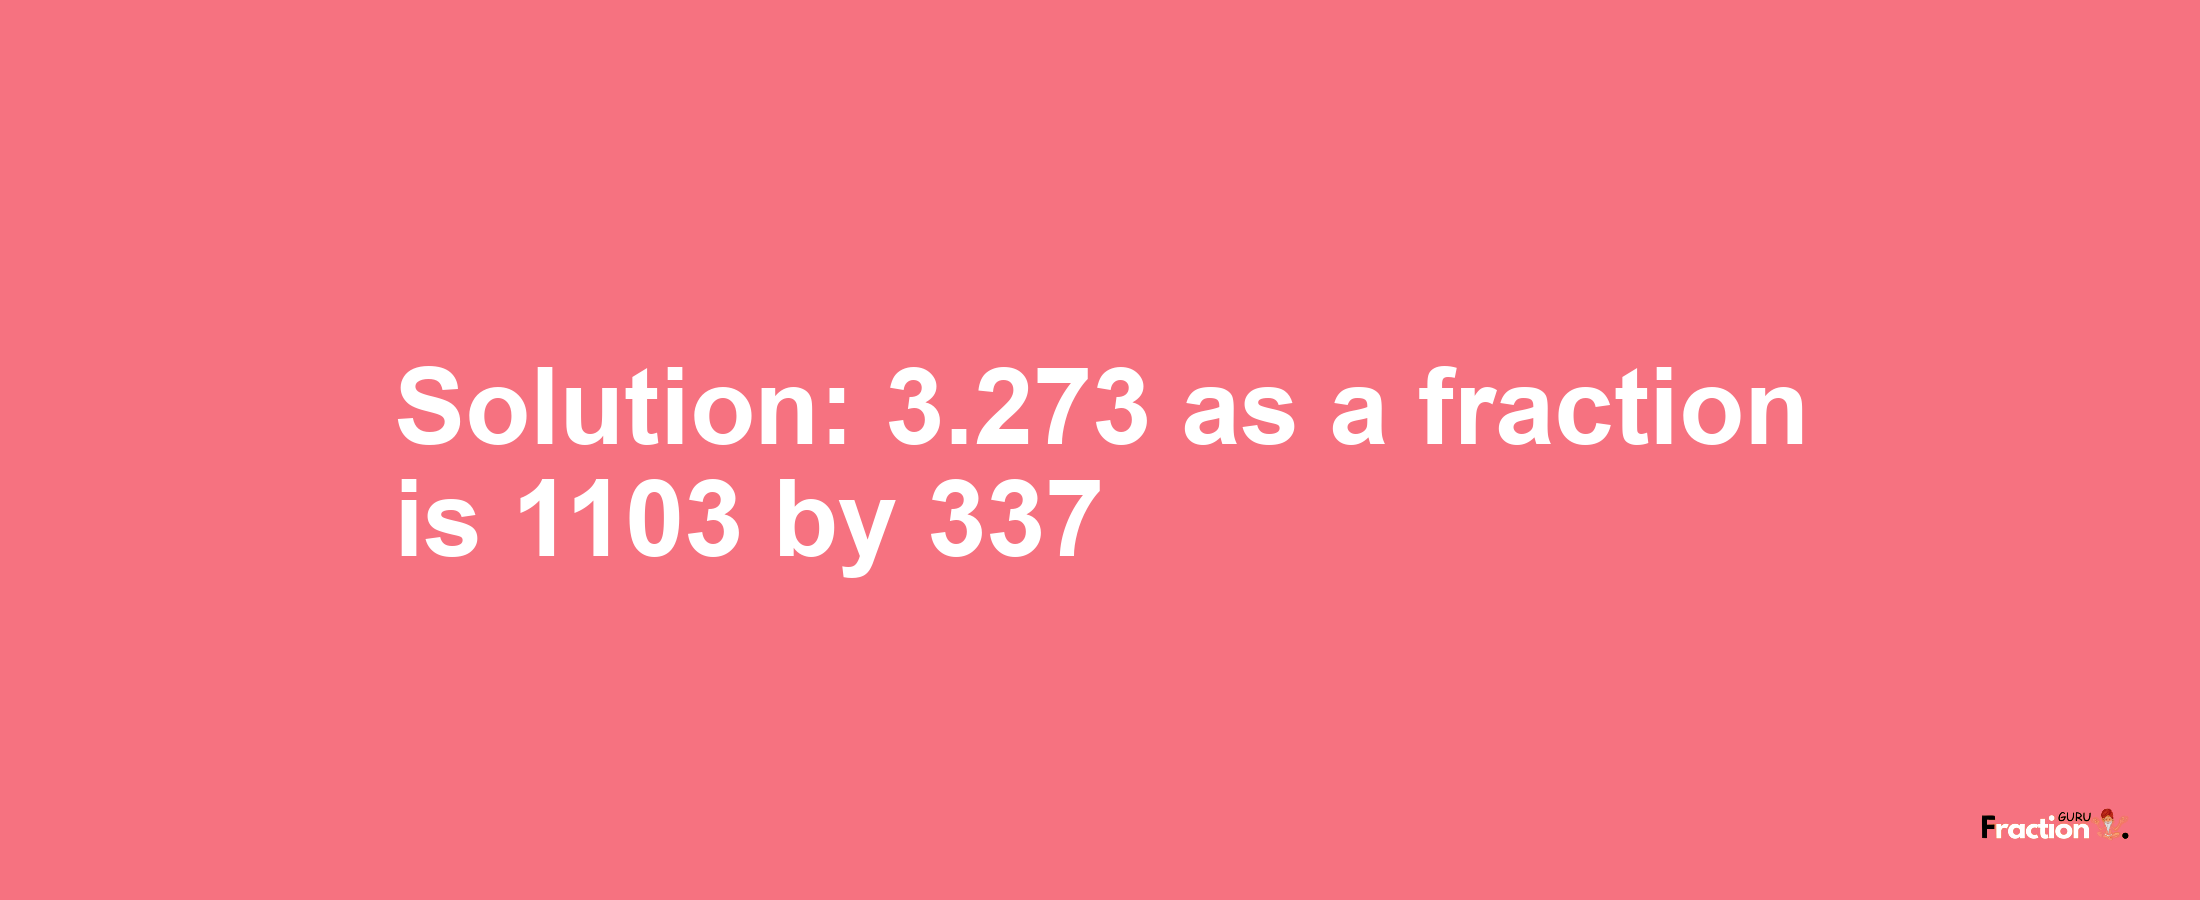 Solution:3.273 as a fraction is 1103/337